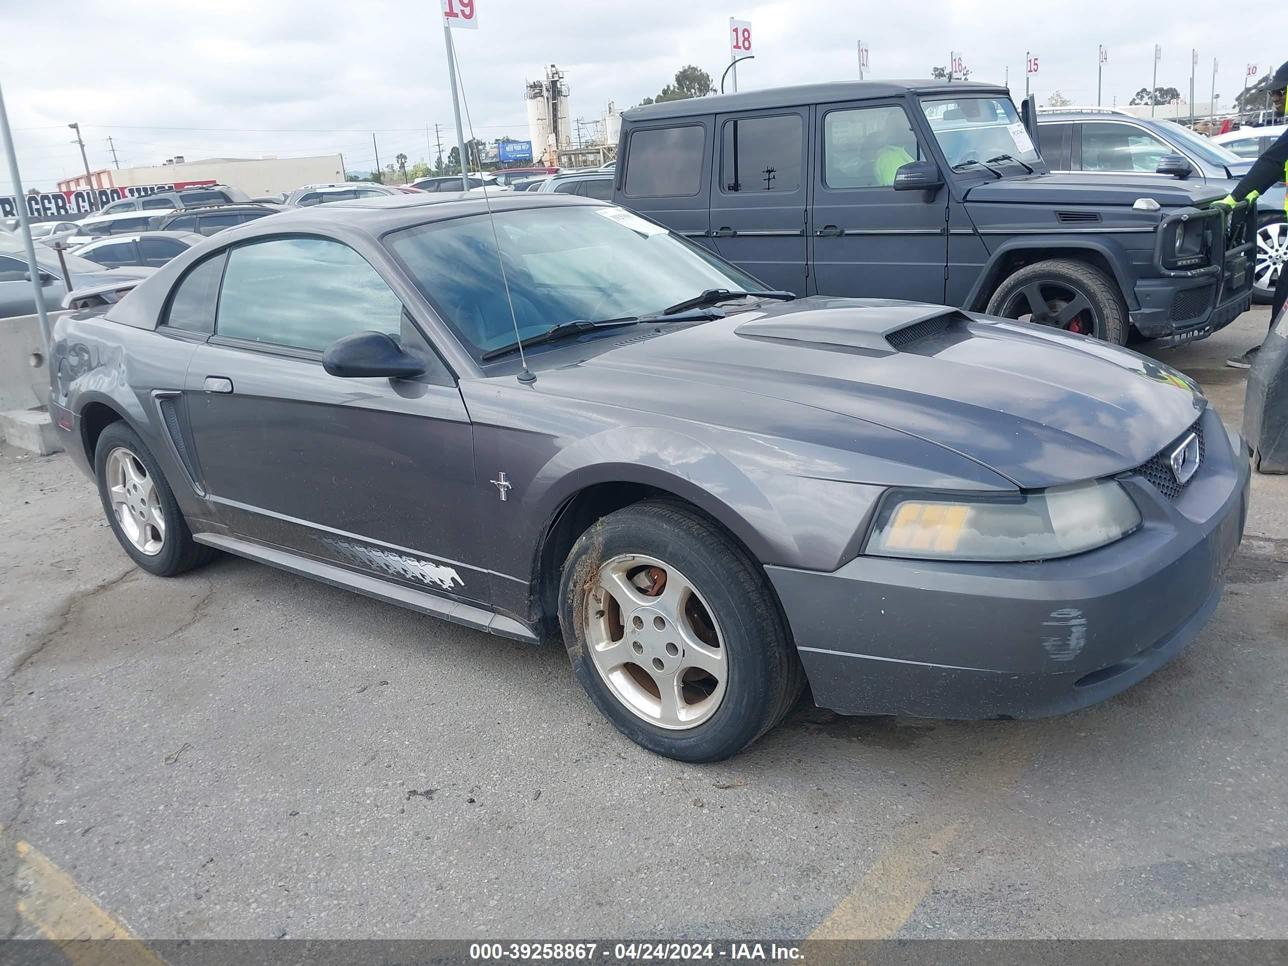 vin: 1FAFP404X3F357449 1FAFP404X3F357449 2003 ford mustang 3800 for Sale in 91605, 7245 Laurel Canyon Blvd, Los Angeles, California, USA